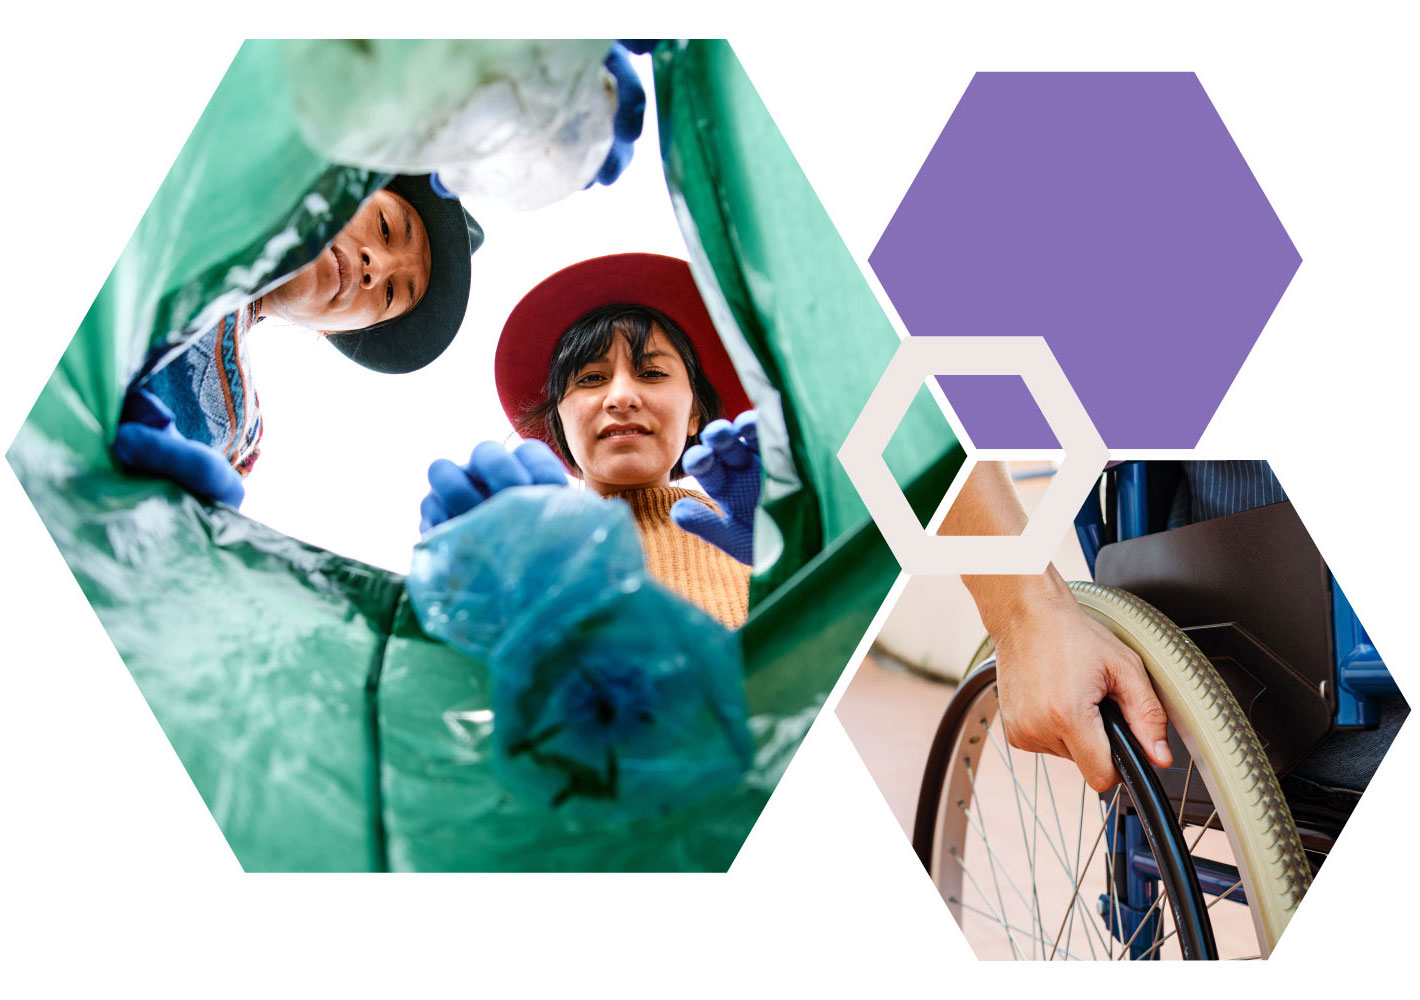 Hexagon image collage featuring an image of organizers working  and an image of a wheelchair wheel.